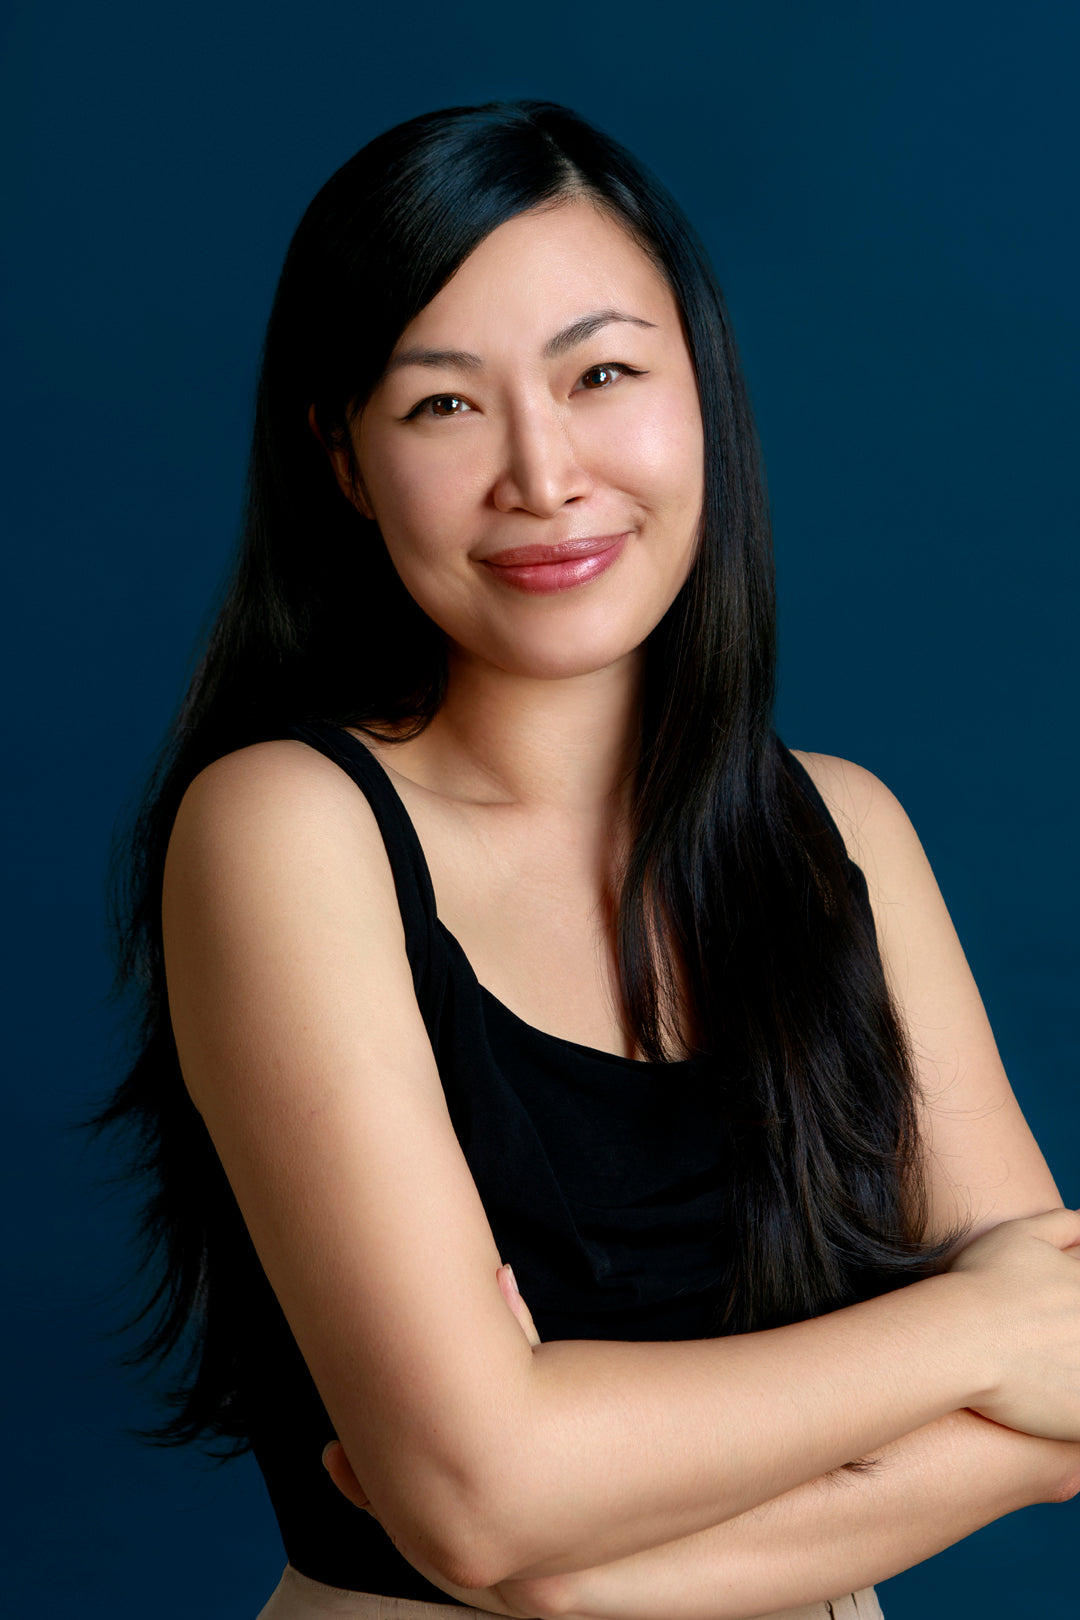 An optimist who loves to clean, Jenn Tsang is also the founder and CEO of Sqwishful.